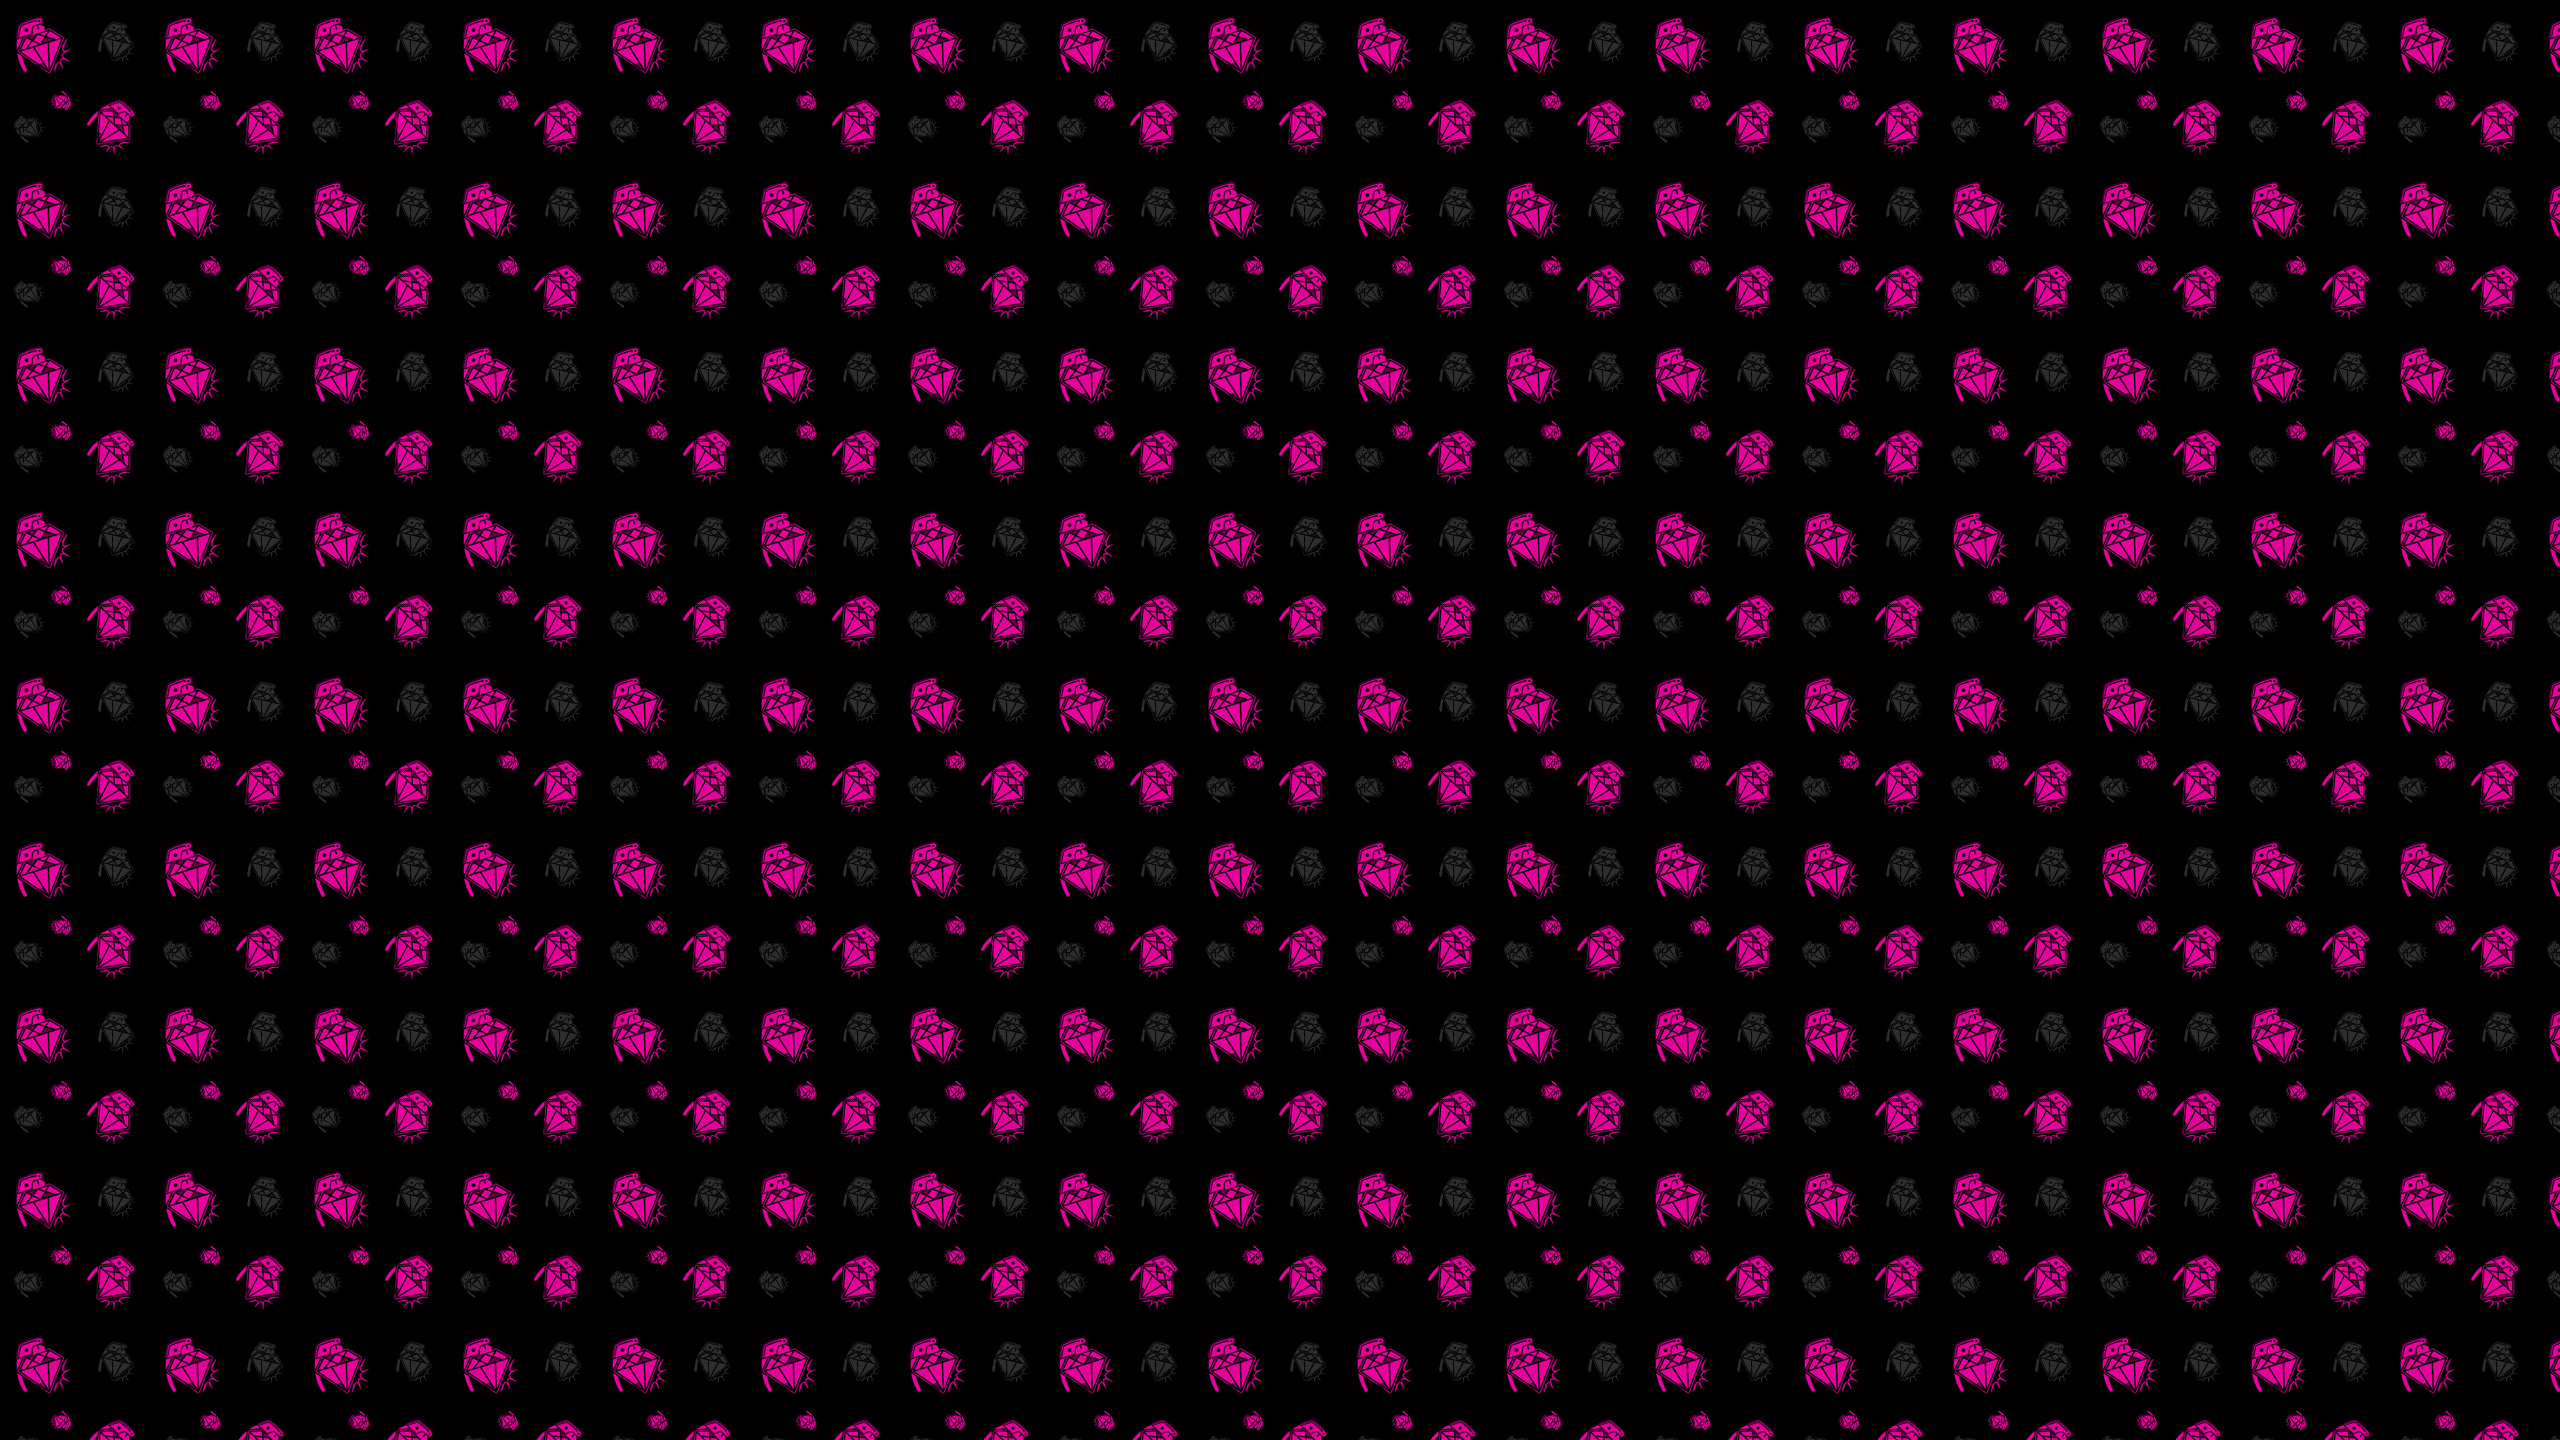 Free download My Wallpaper Place Black Stone Pink Petals Android